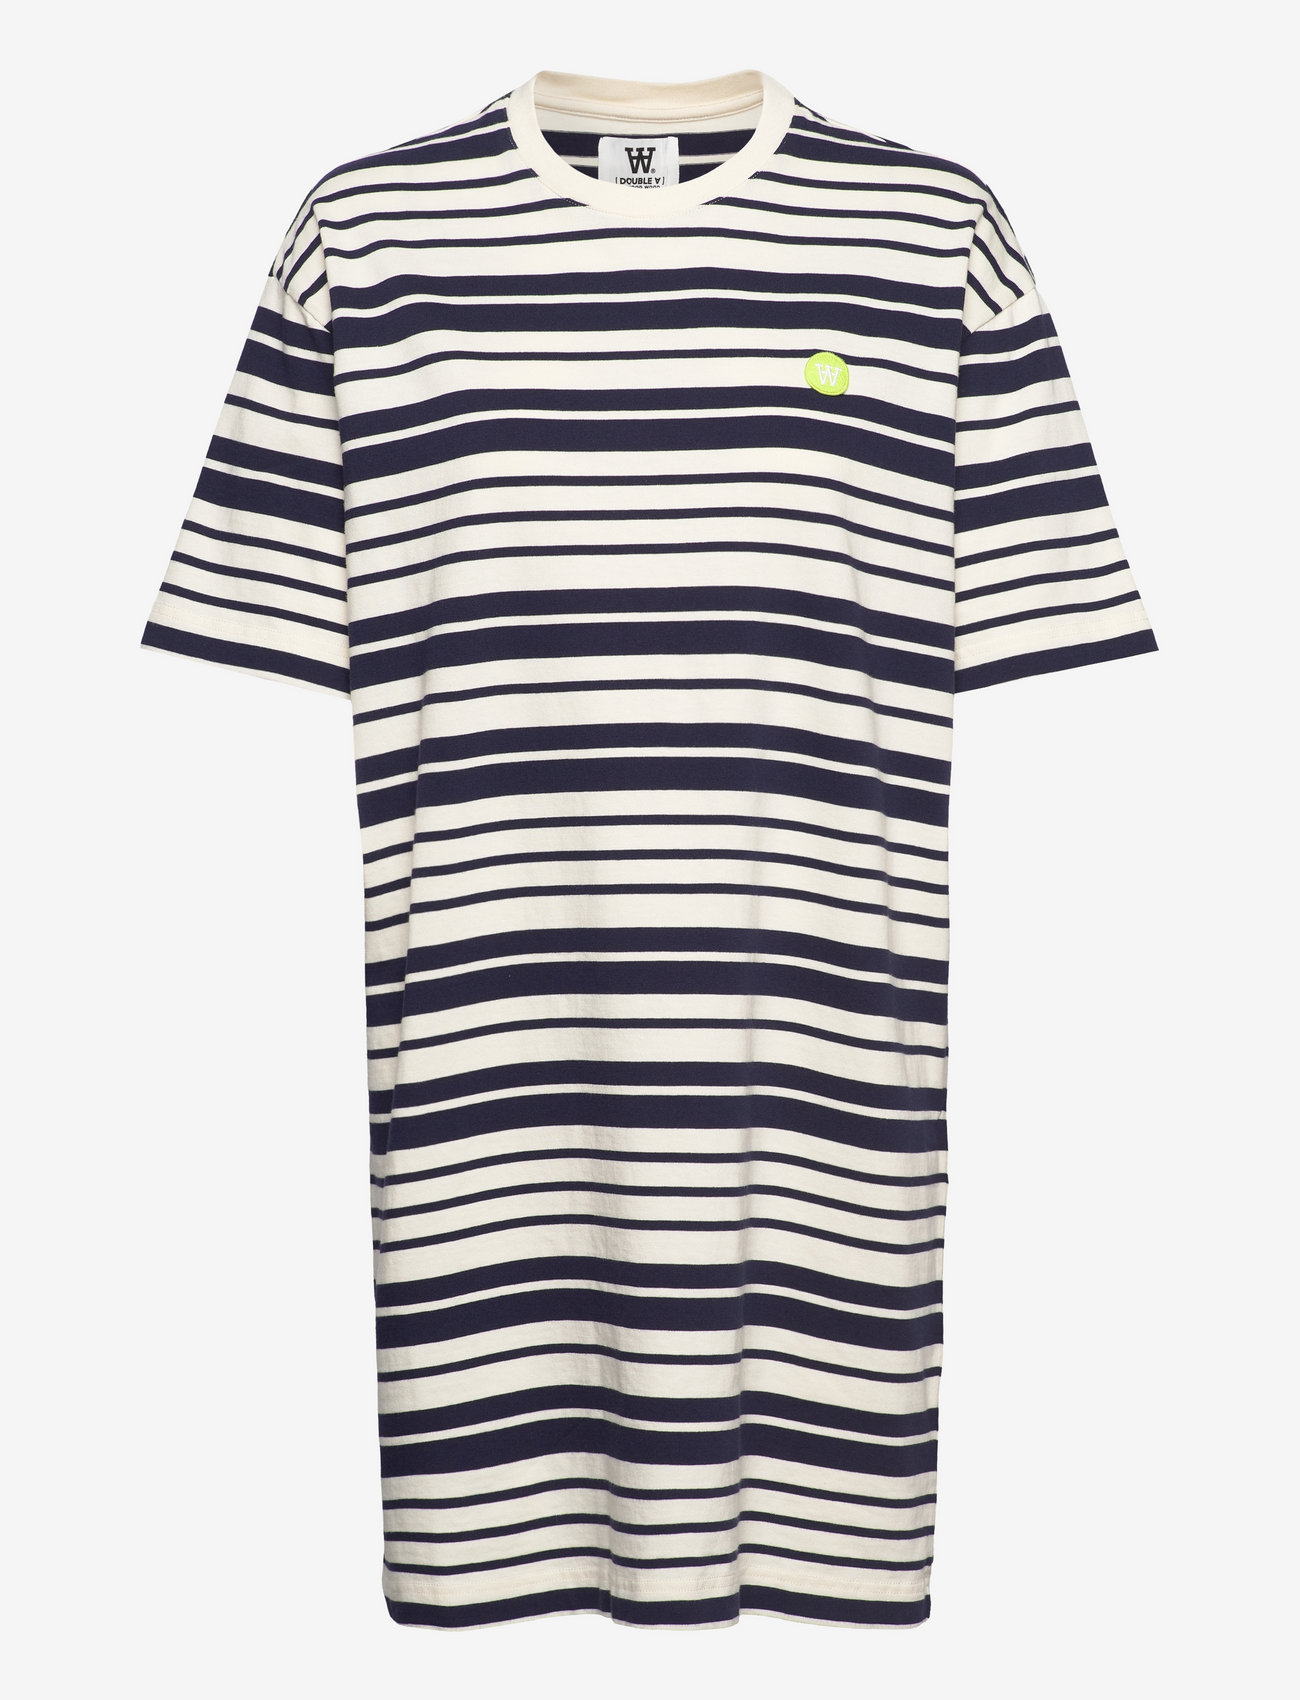 Double A by Wood Wood - Ulla stripe dress - t-shirt dresses - off-white/navy stripes - 0